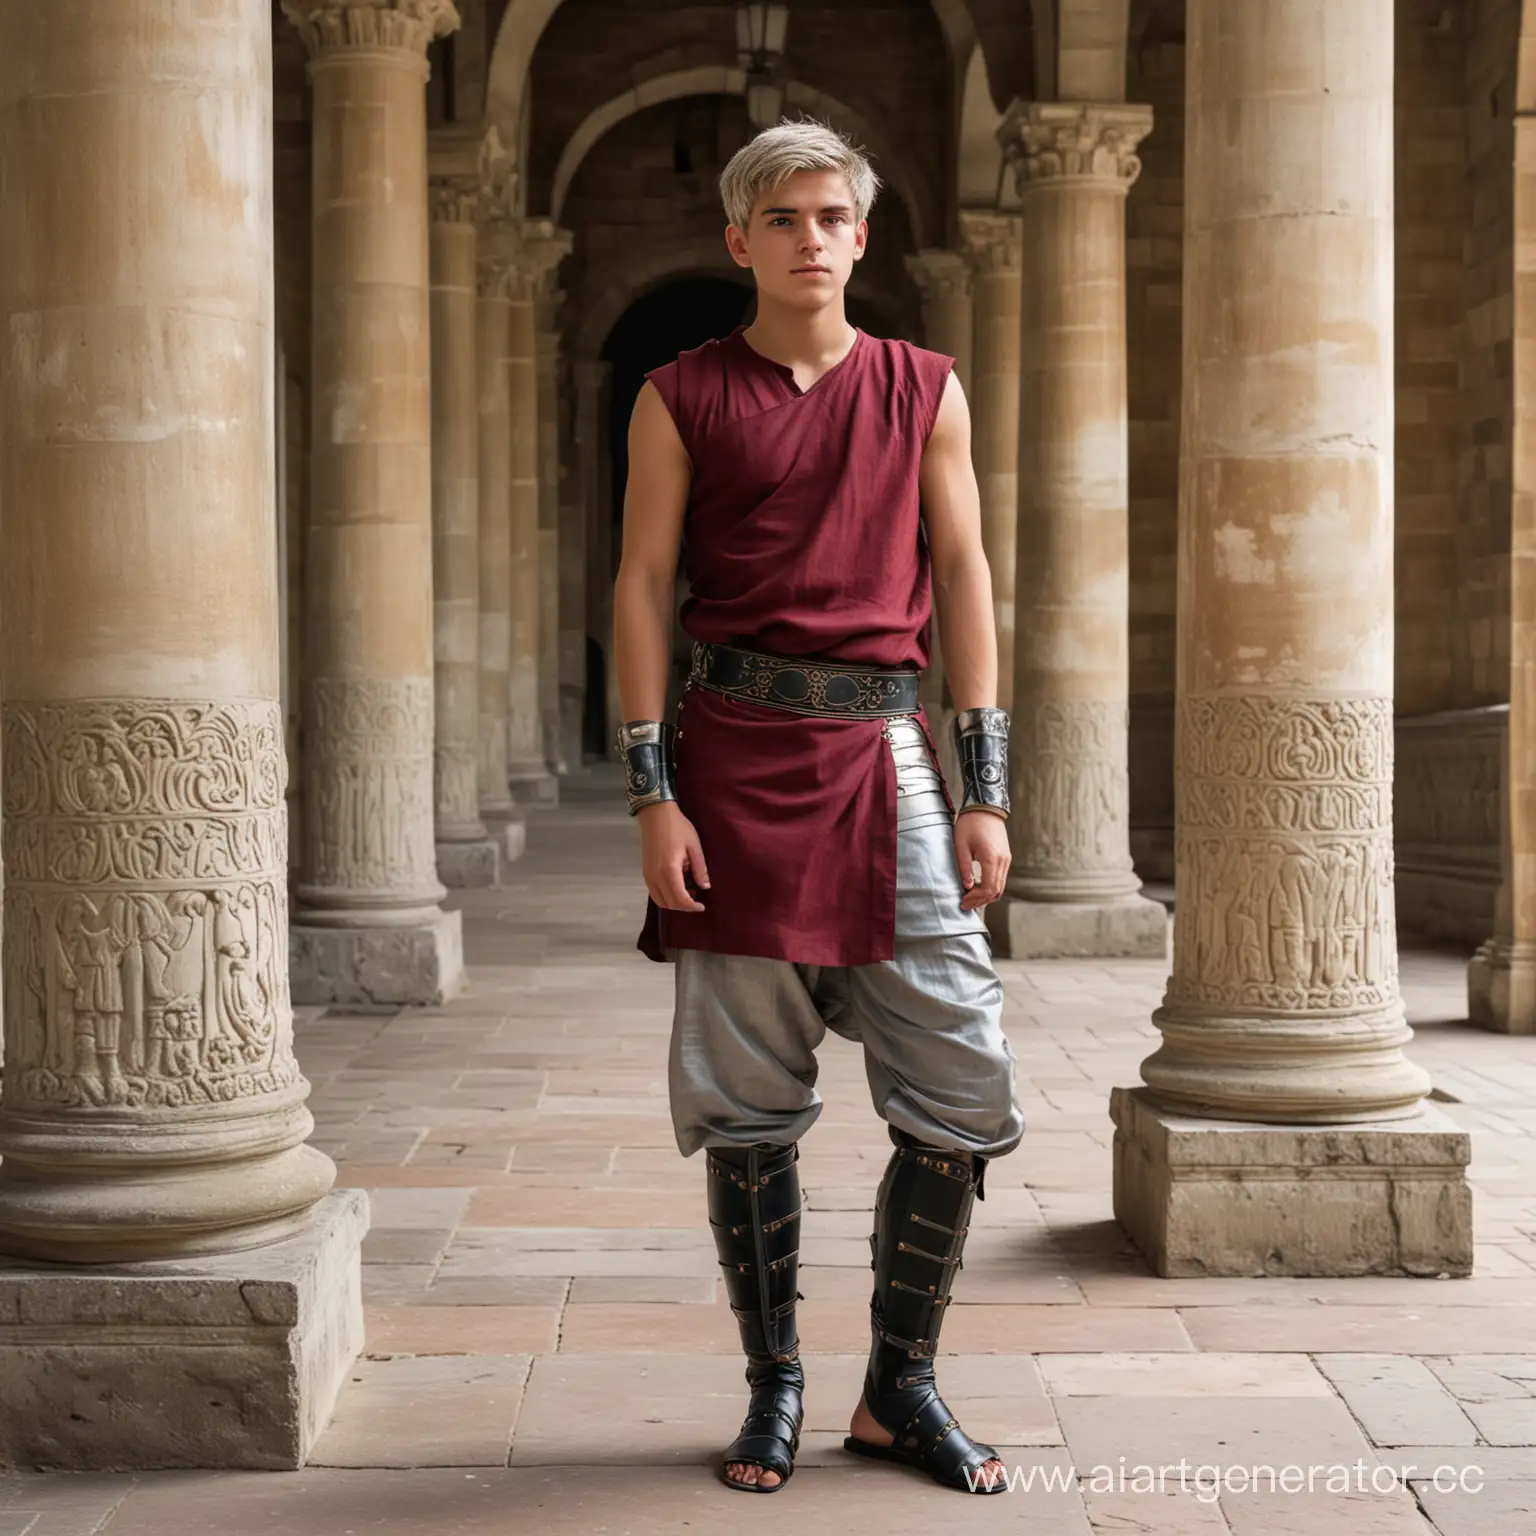 Young-Man-in-Ancient-Roman-Attire-Standing-on-Palace-Terrace